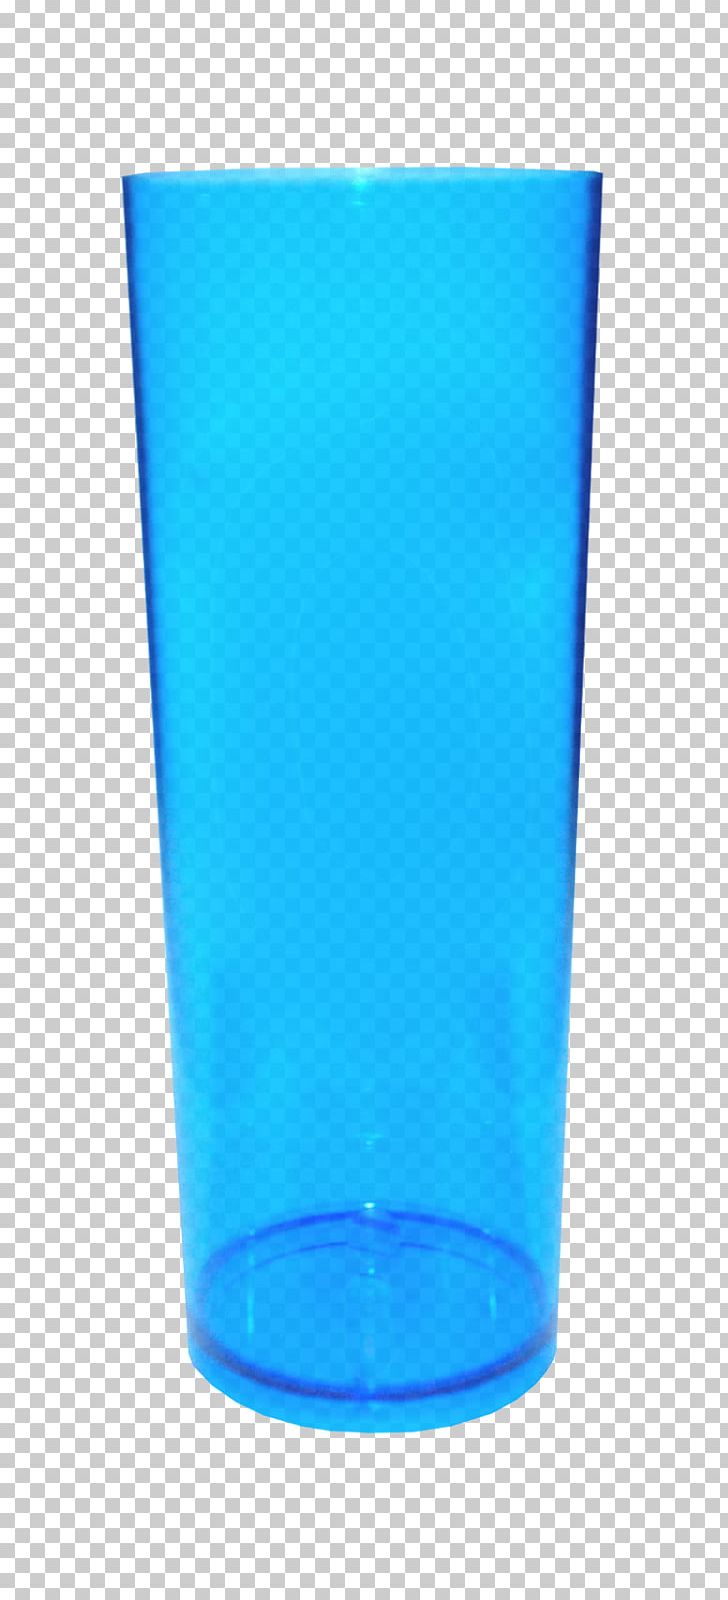 Highball Glass Old Fashioned Glass Pint Glass PNG, Clipart, Aqua, Blue, Cobalt Blue, Cylinder, Drinkware Free PNG Download